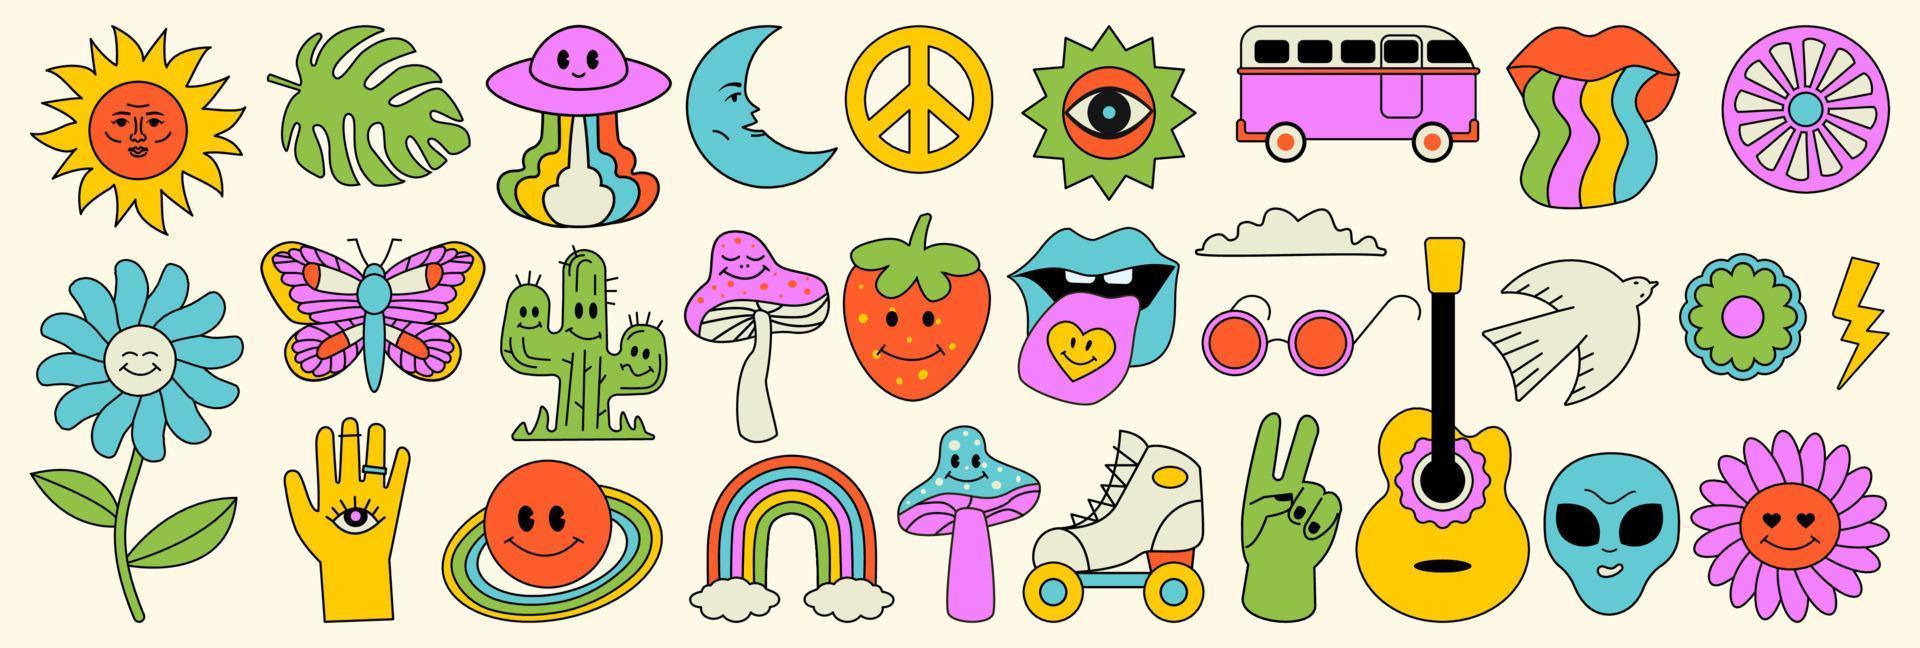 Elements in the hippie style of the 70s, a collection of psychedelic groove. Cartoon funny mushrooms, flowers, butterfly, alien, rainbow, nostalgic colorful set of vector shapes.